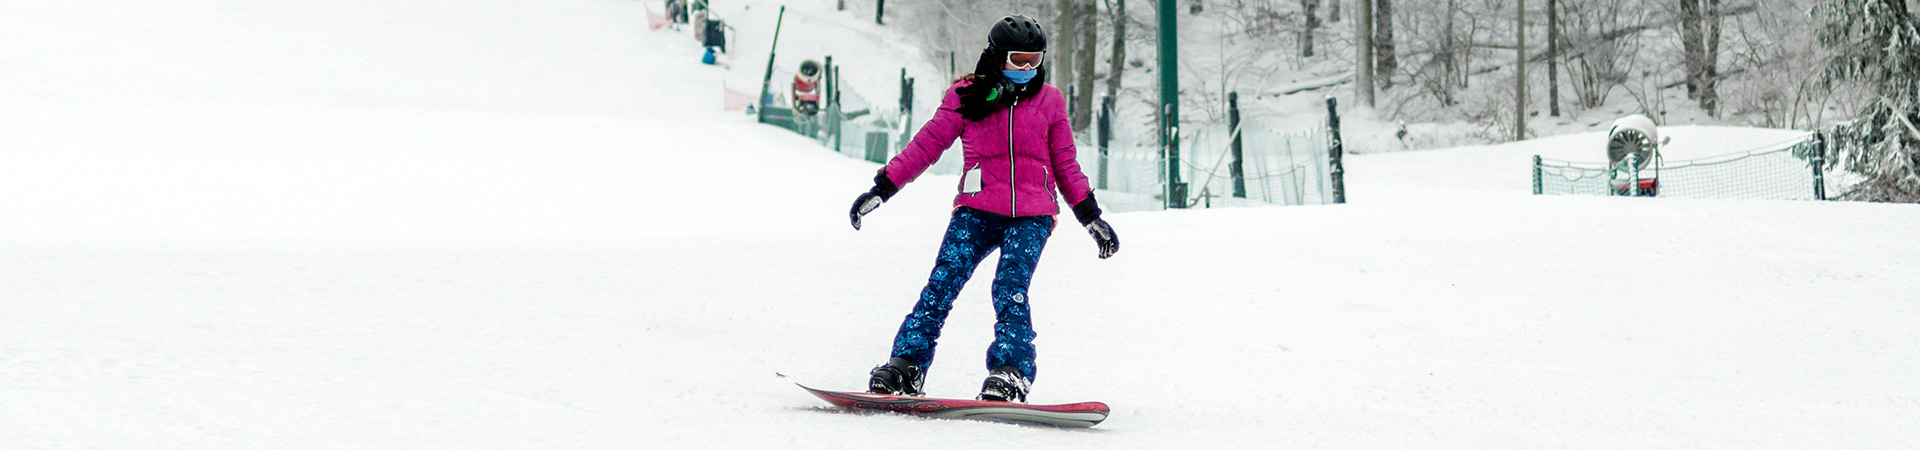  A girl wearing a magenta jacket and blue snow pants snowboarding 